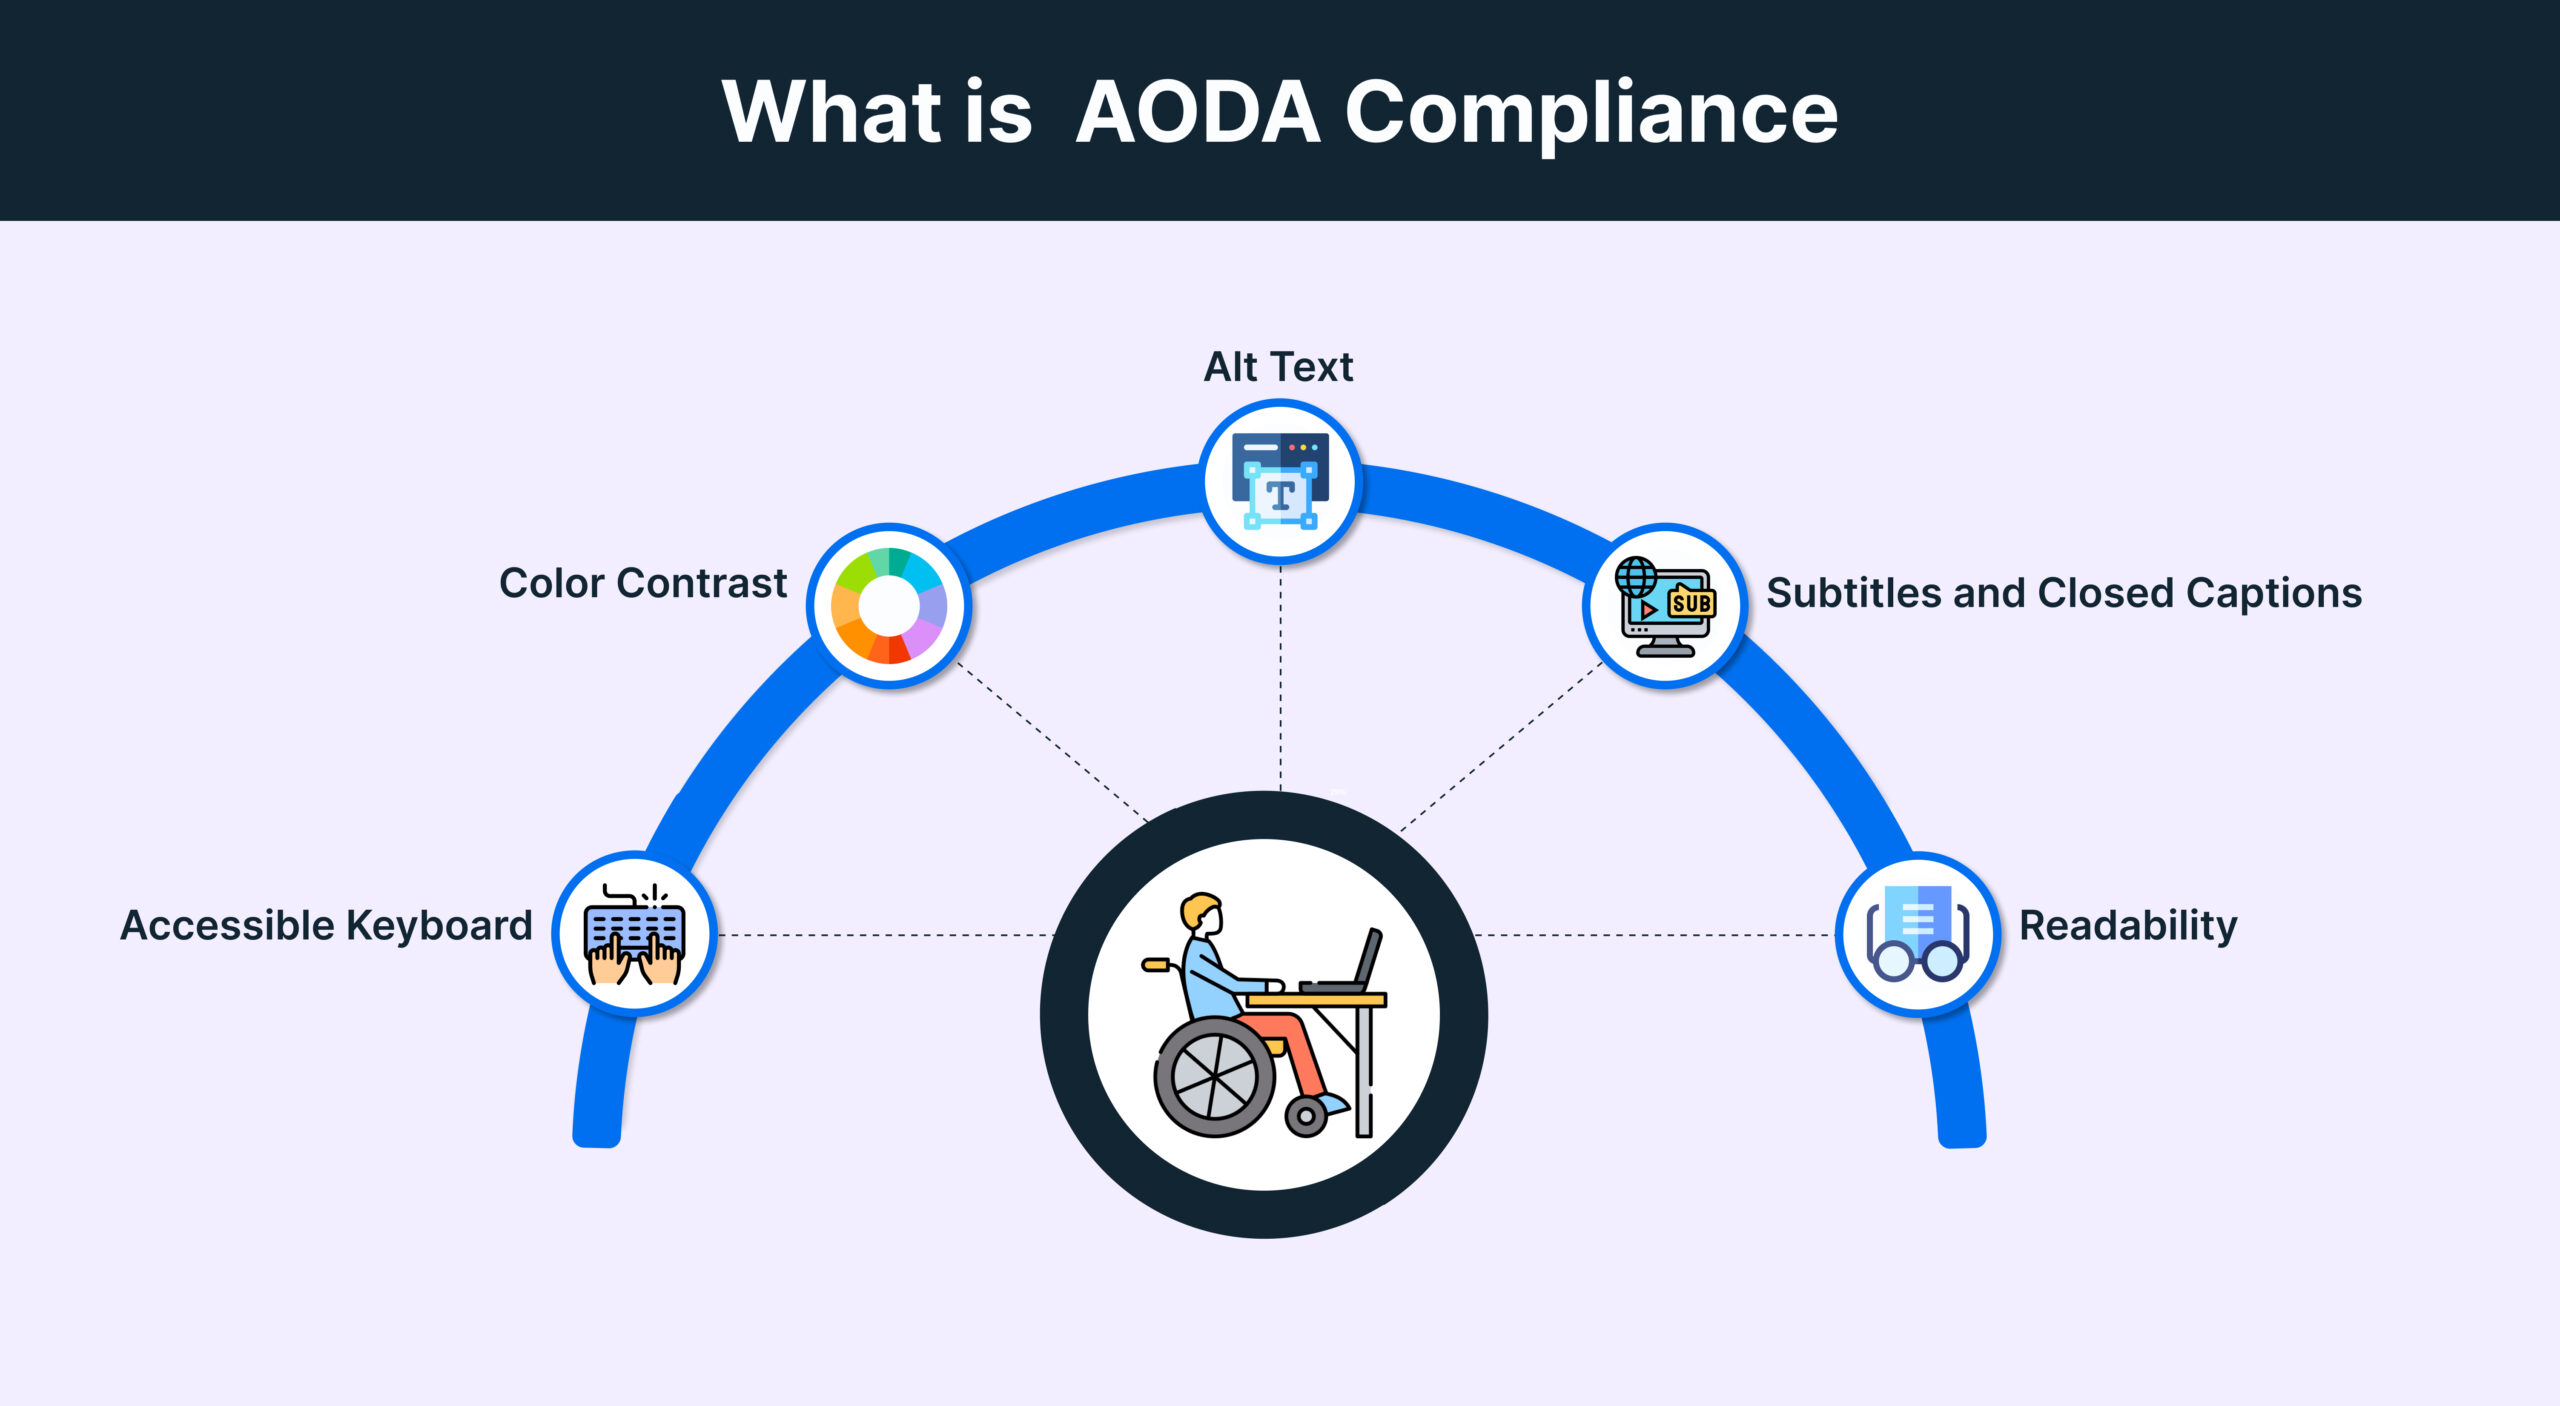 What is AODA Compliance